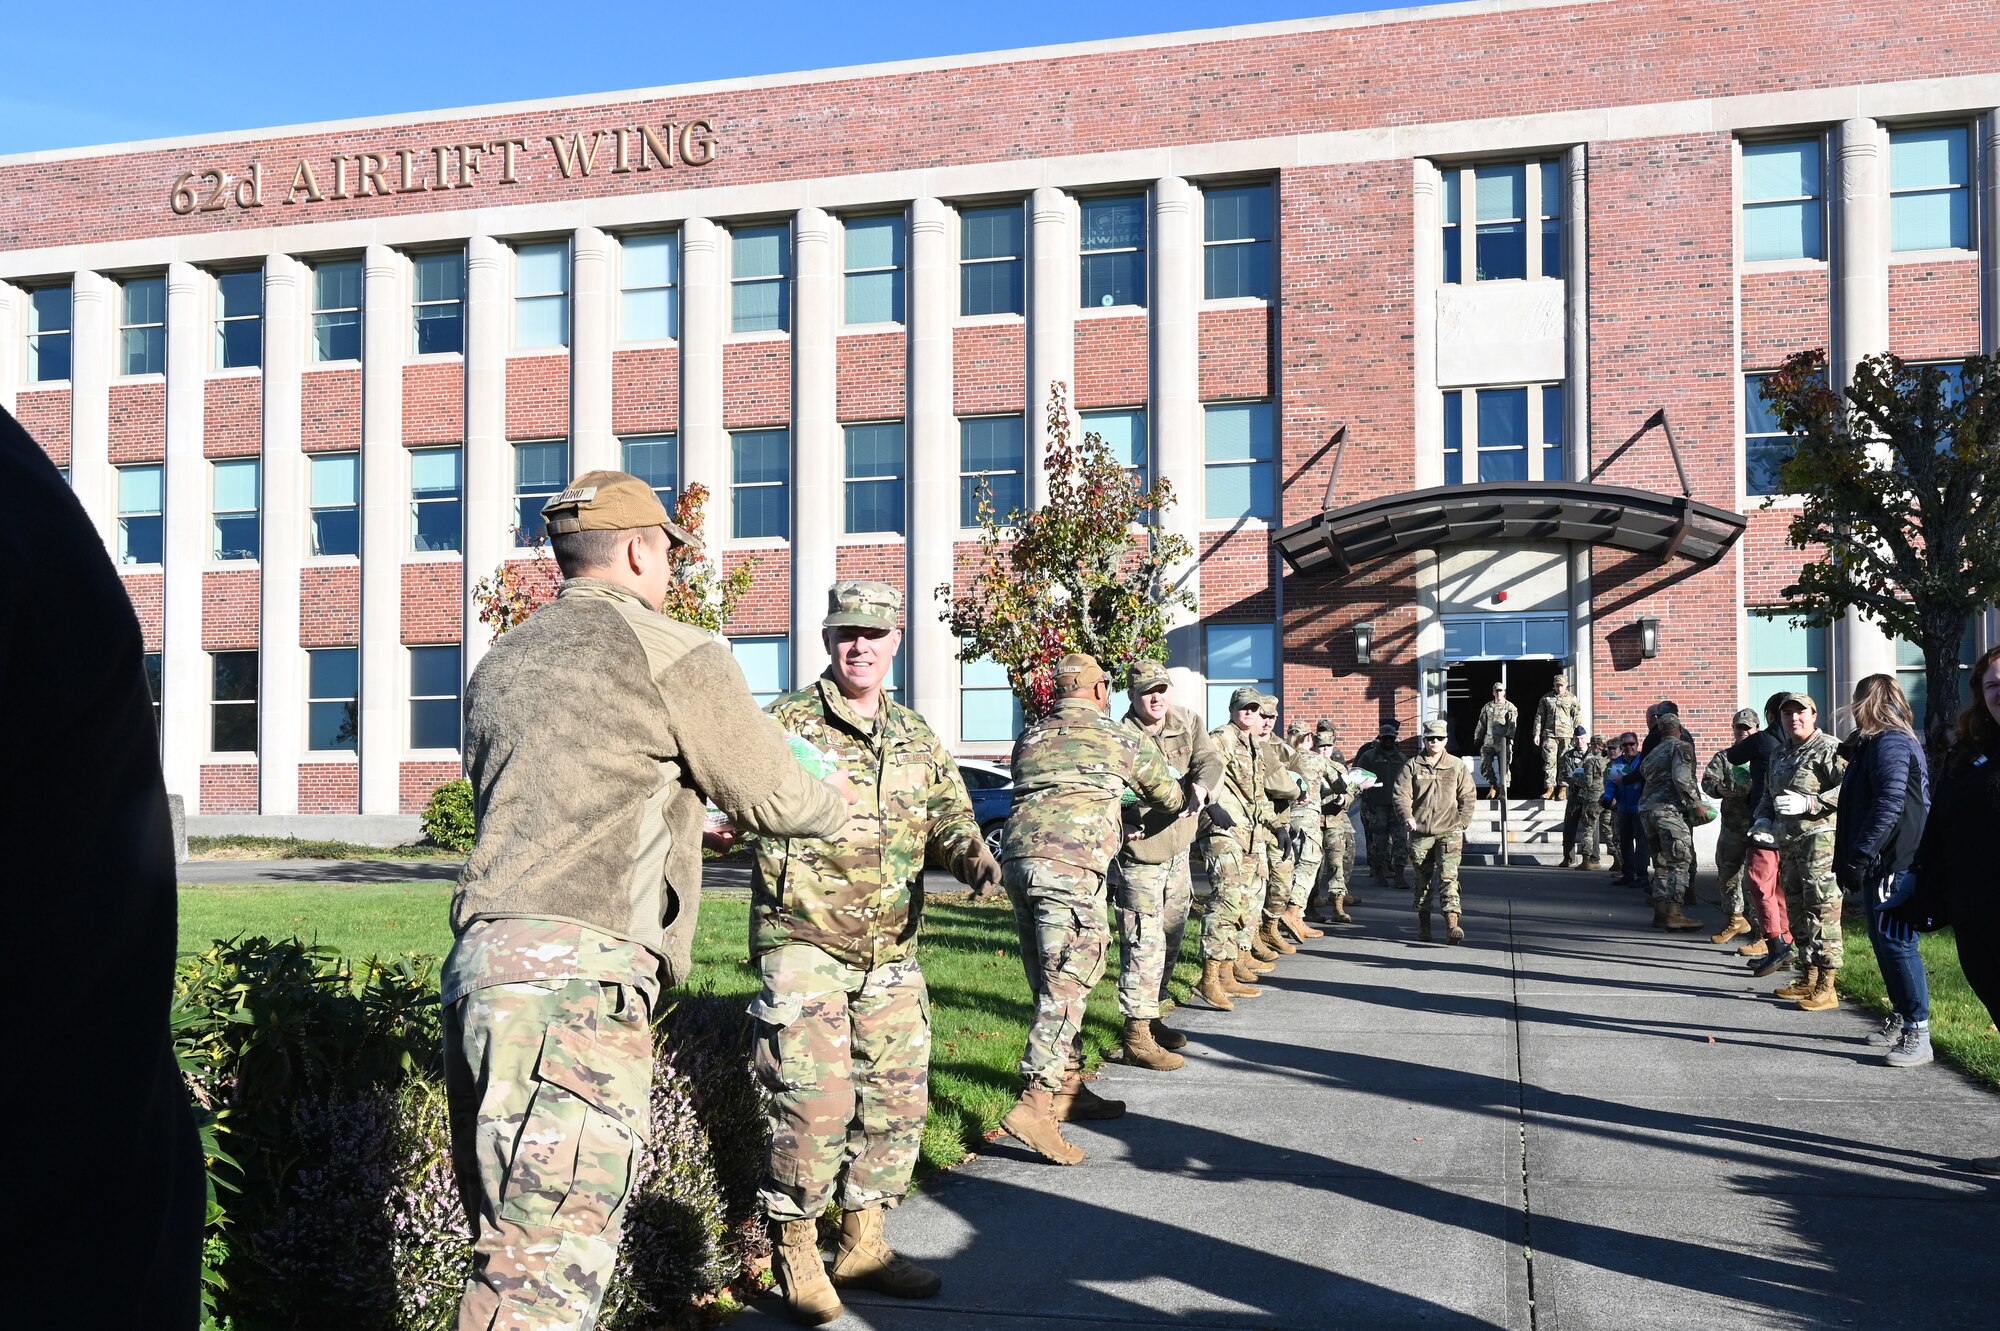 Operation Turkey Drop is an event in which the community, local businesses and leadership from around JBLM give out turkeys to Team McChord Airmen and their families in celebration of Thanksgiving.